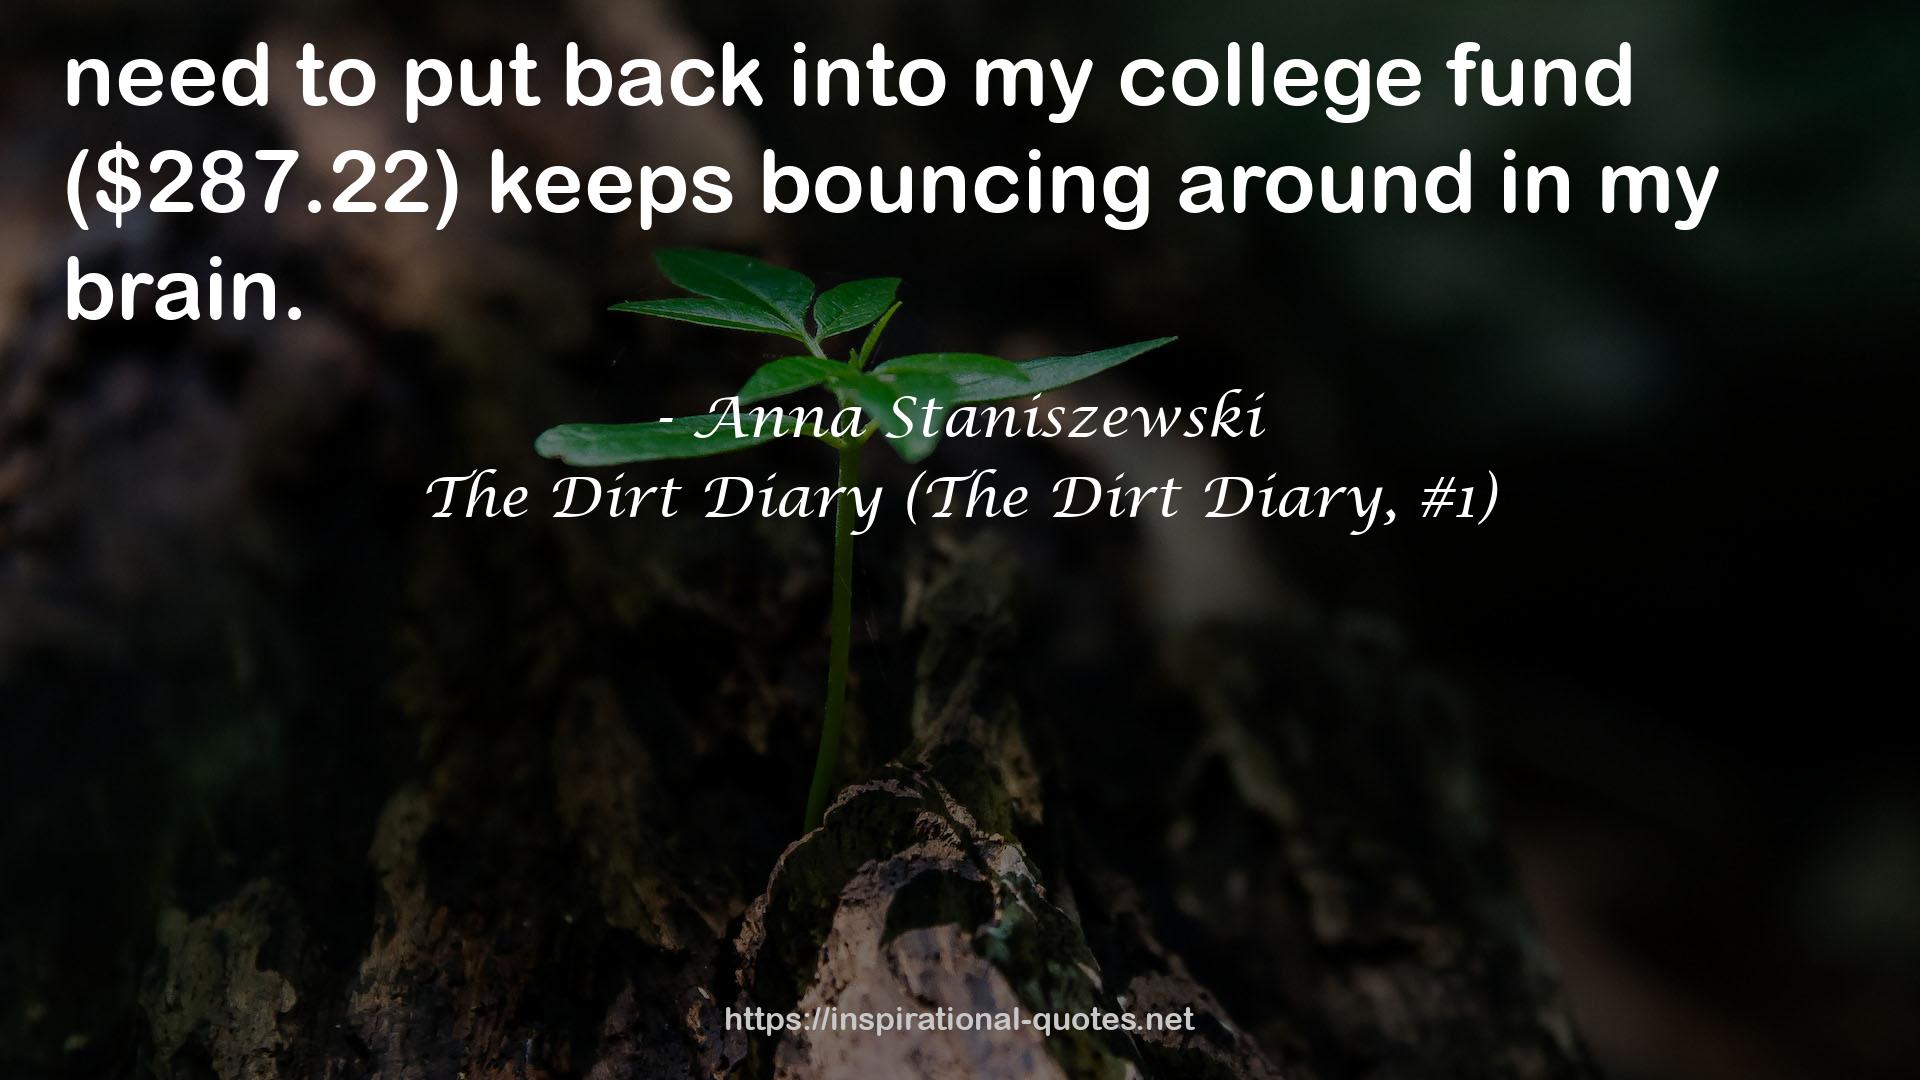 The Dirt Diary (The Dirt Diary, #1) QUOTES